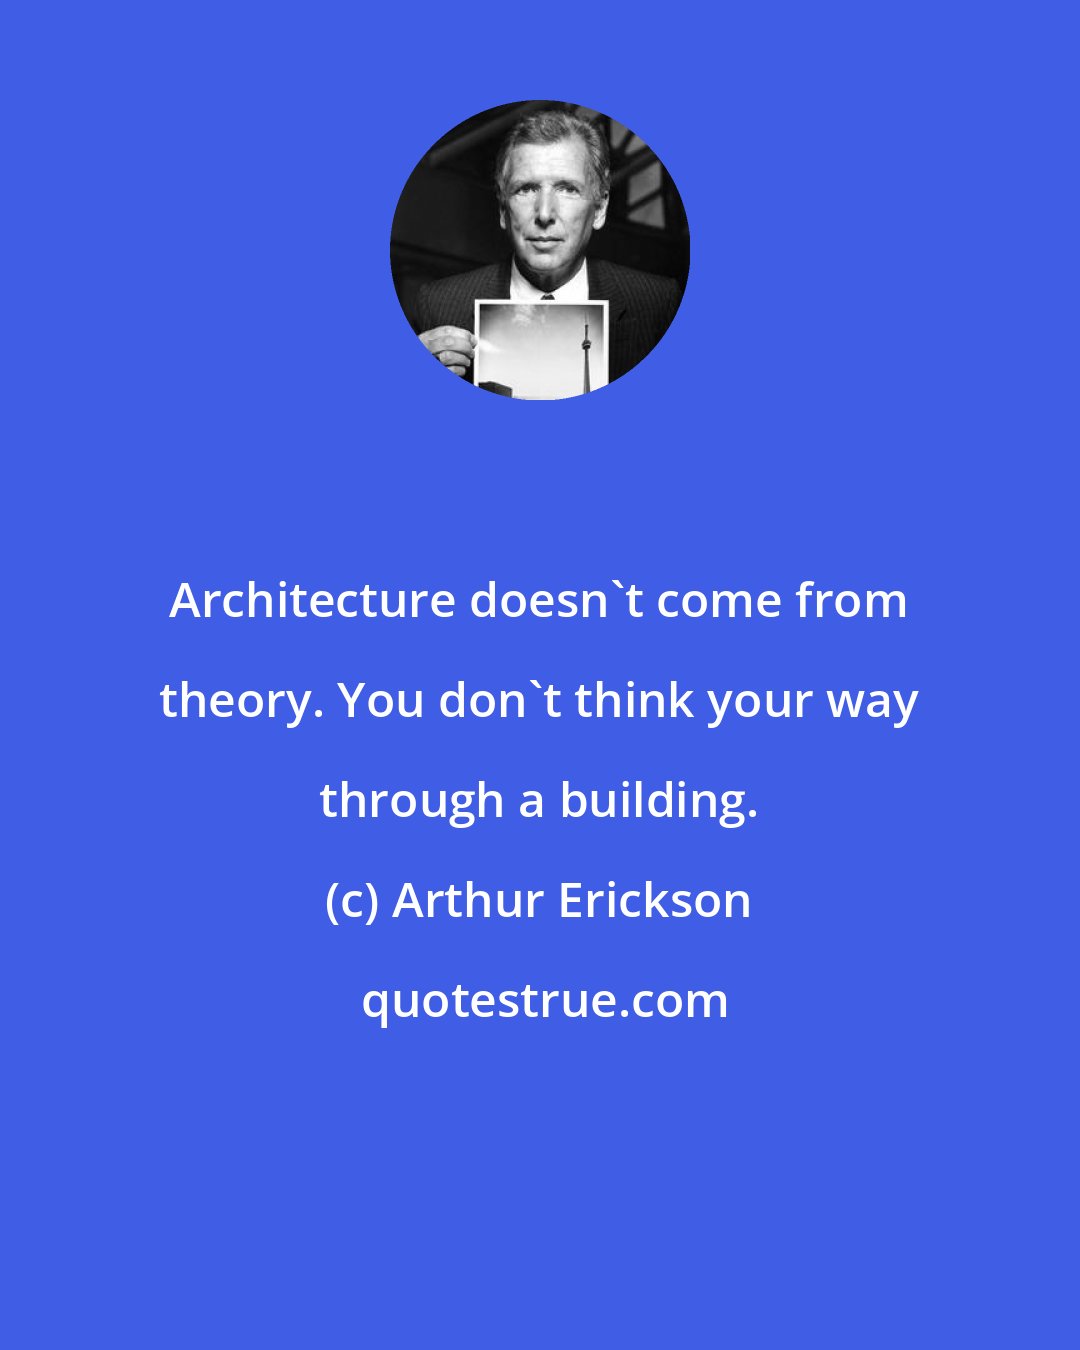 Arthur Erickson: Architecture doesn't come from theory. You don't think your way through a building.